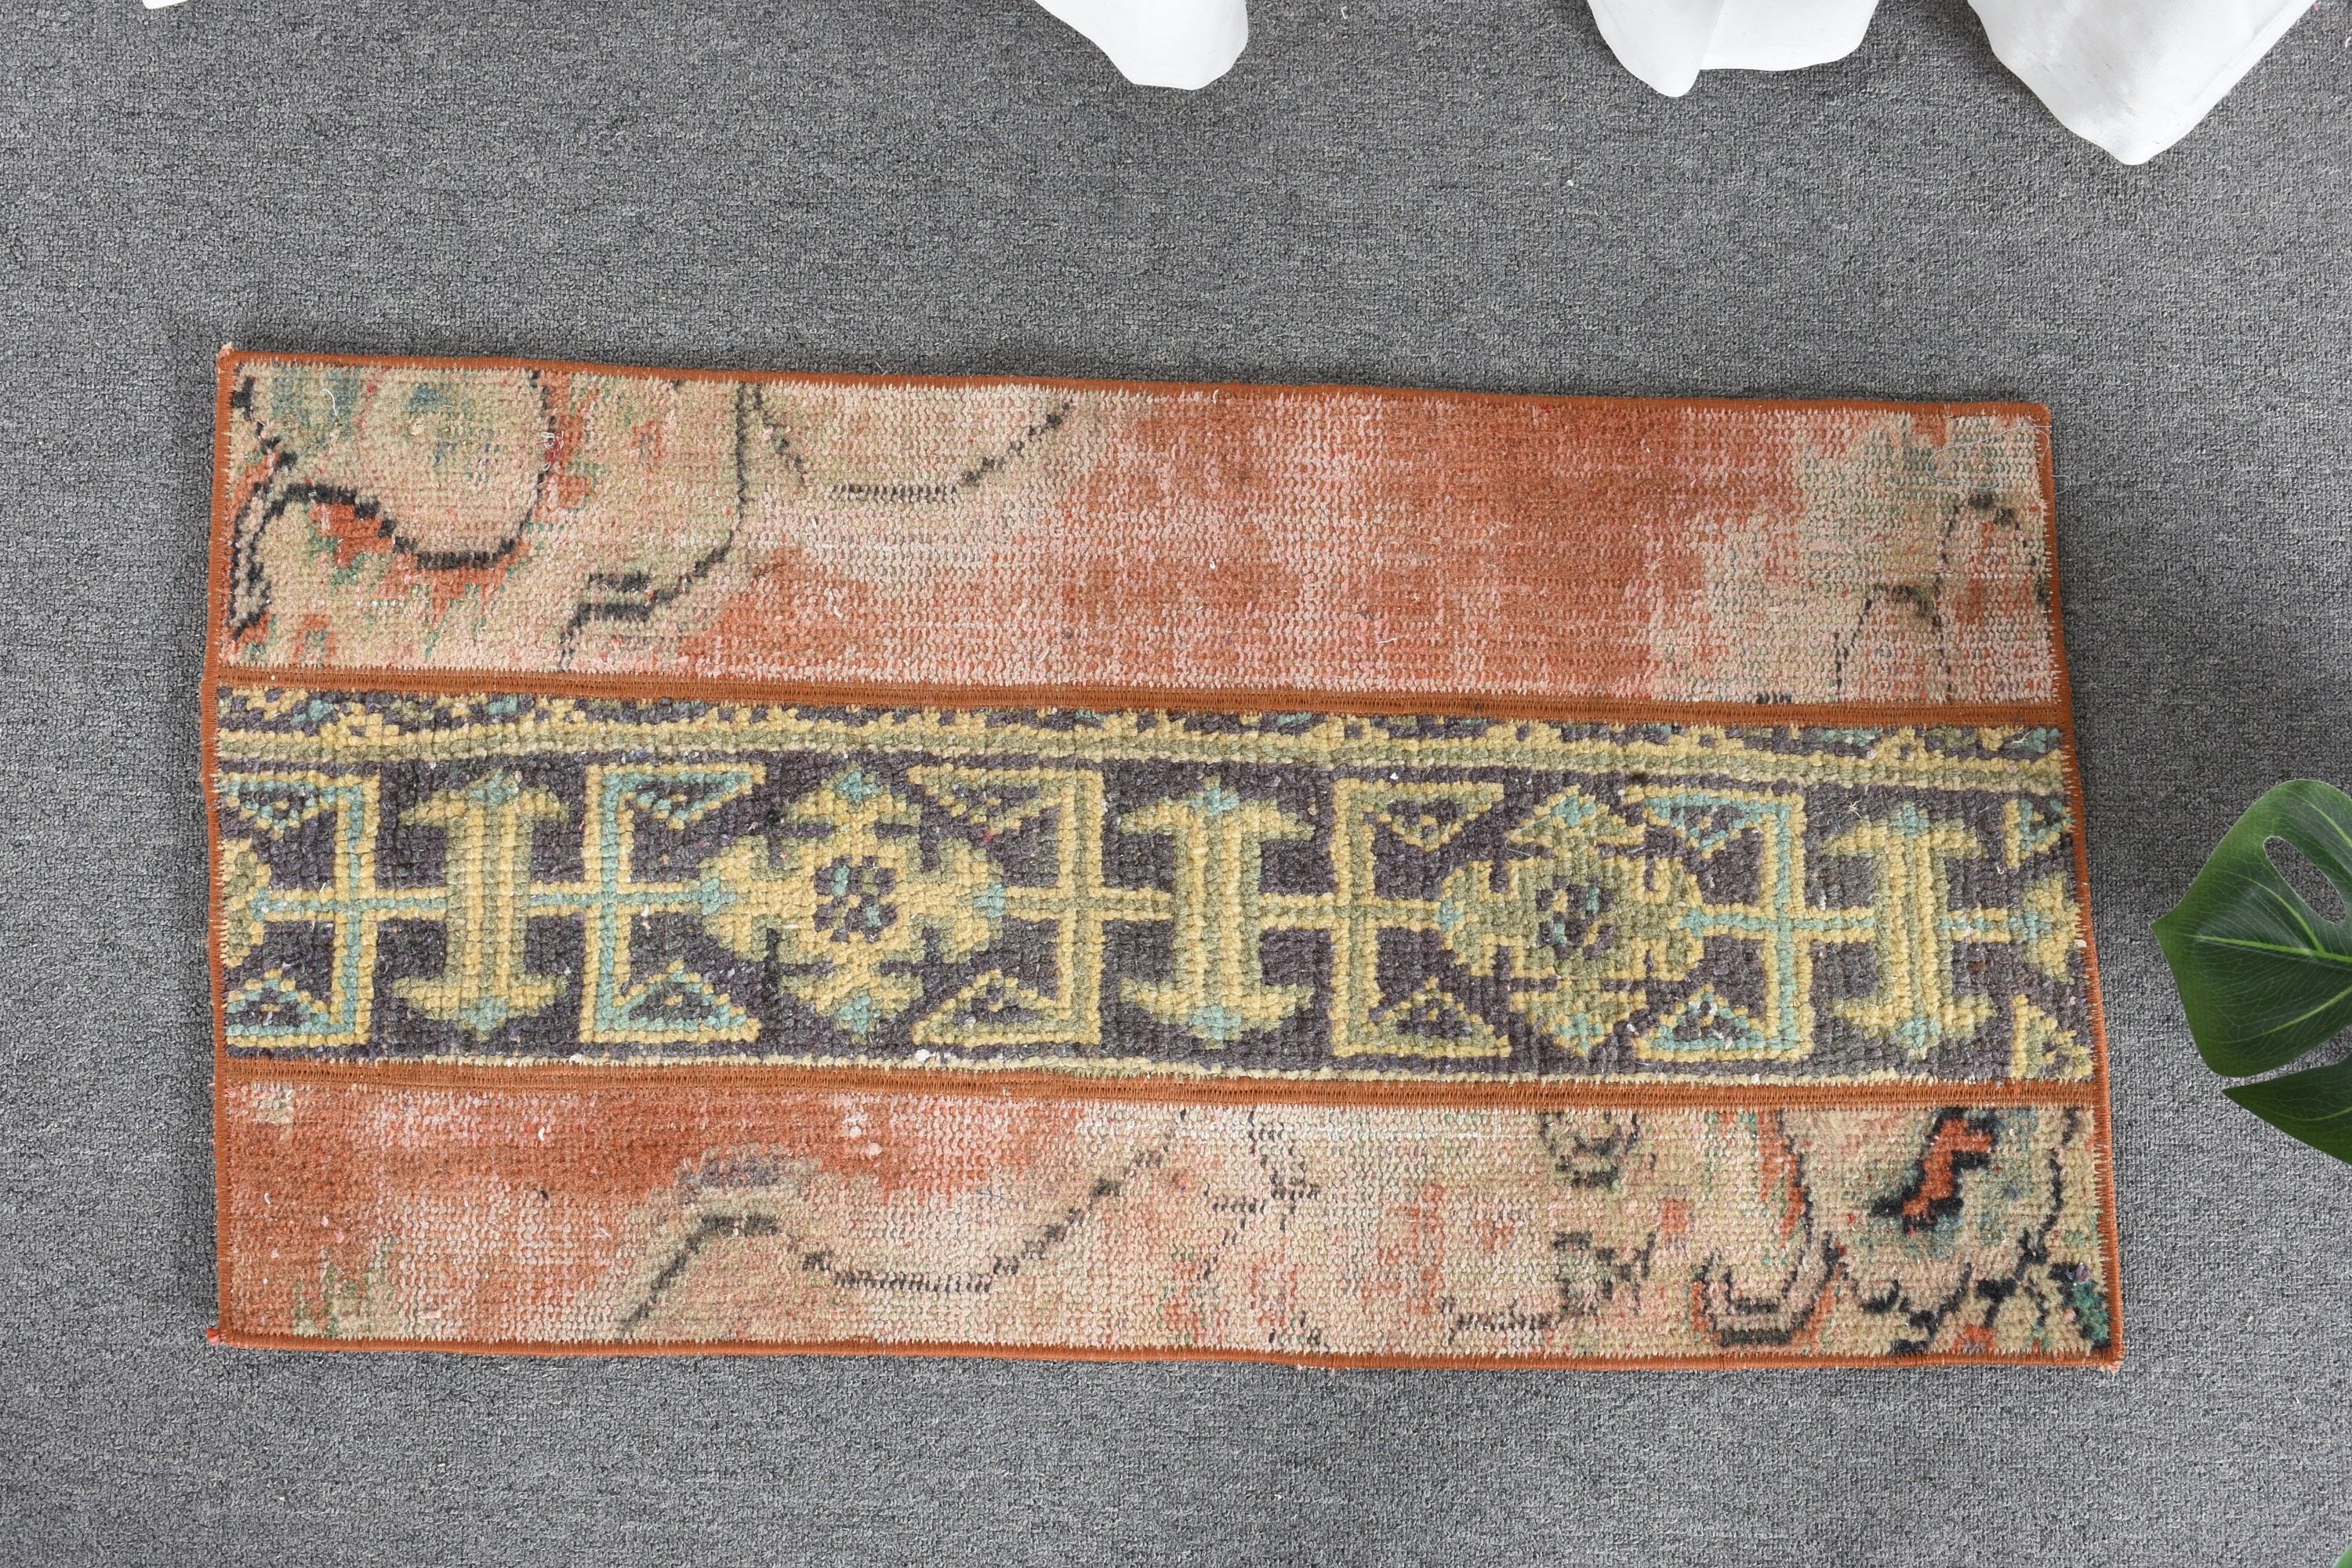 Bedroom Rug, Brown Moroccan Rug, Rugs for Bath, Wall Hanging Rug, Turkish Rug, 1.5x2.9 ft Small Rug, Antique Rugs, Entry Rugs, Vintage Rug